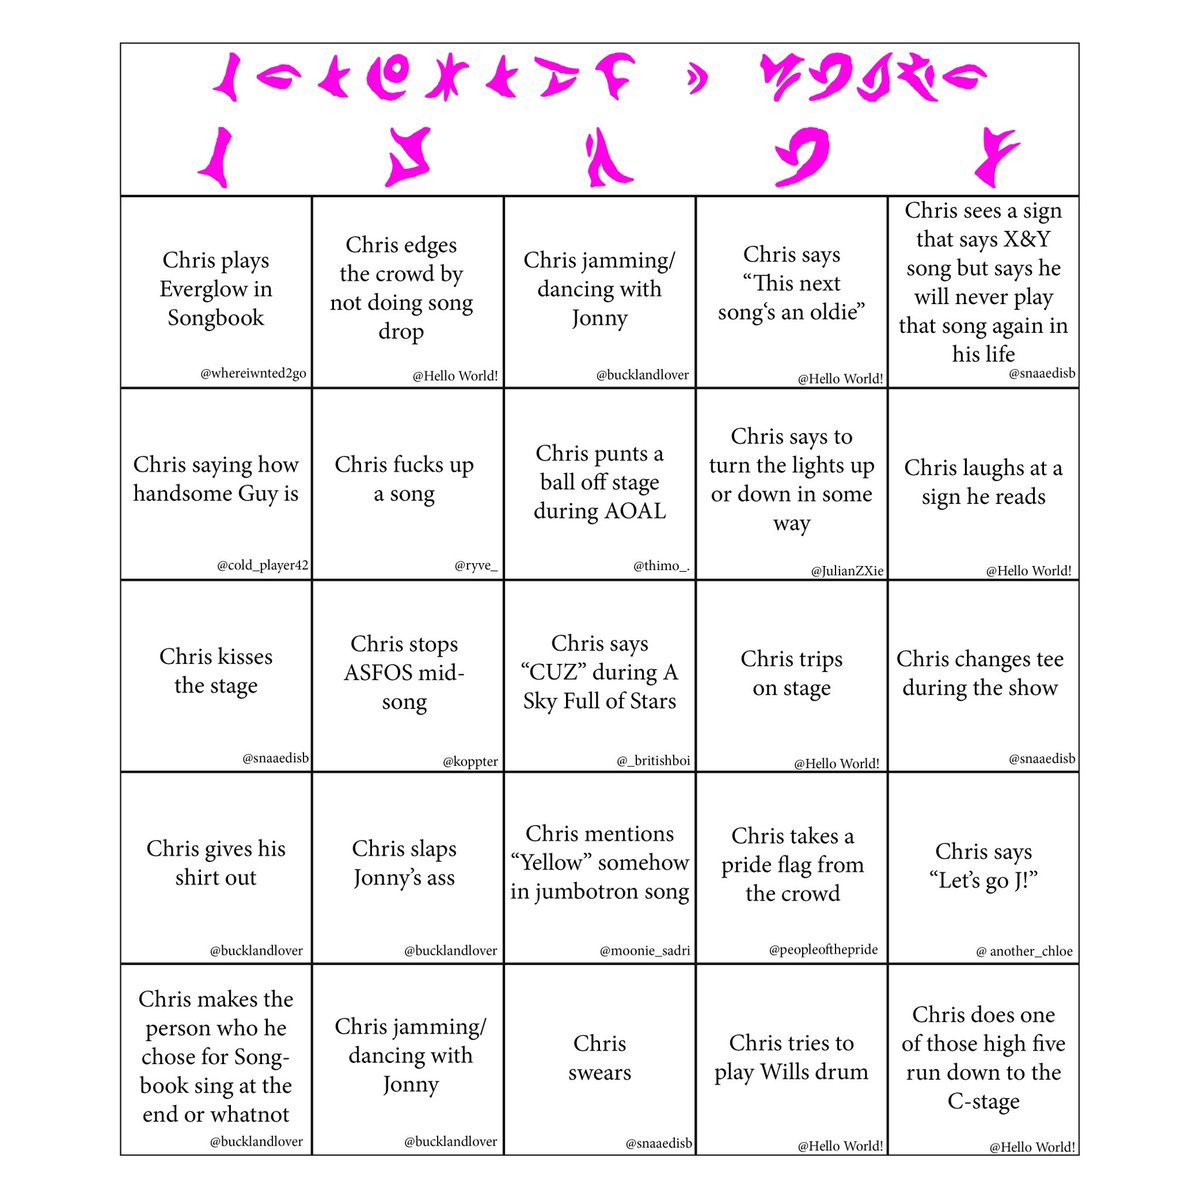 Coldplay are back tomorrow. I have a Bingo card I made earlier this year, it is MOTSWT based but why not use it tomorrow for Big Weekend and see if they do some of it🤪